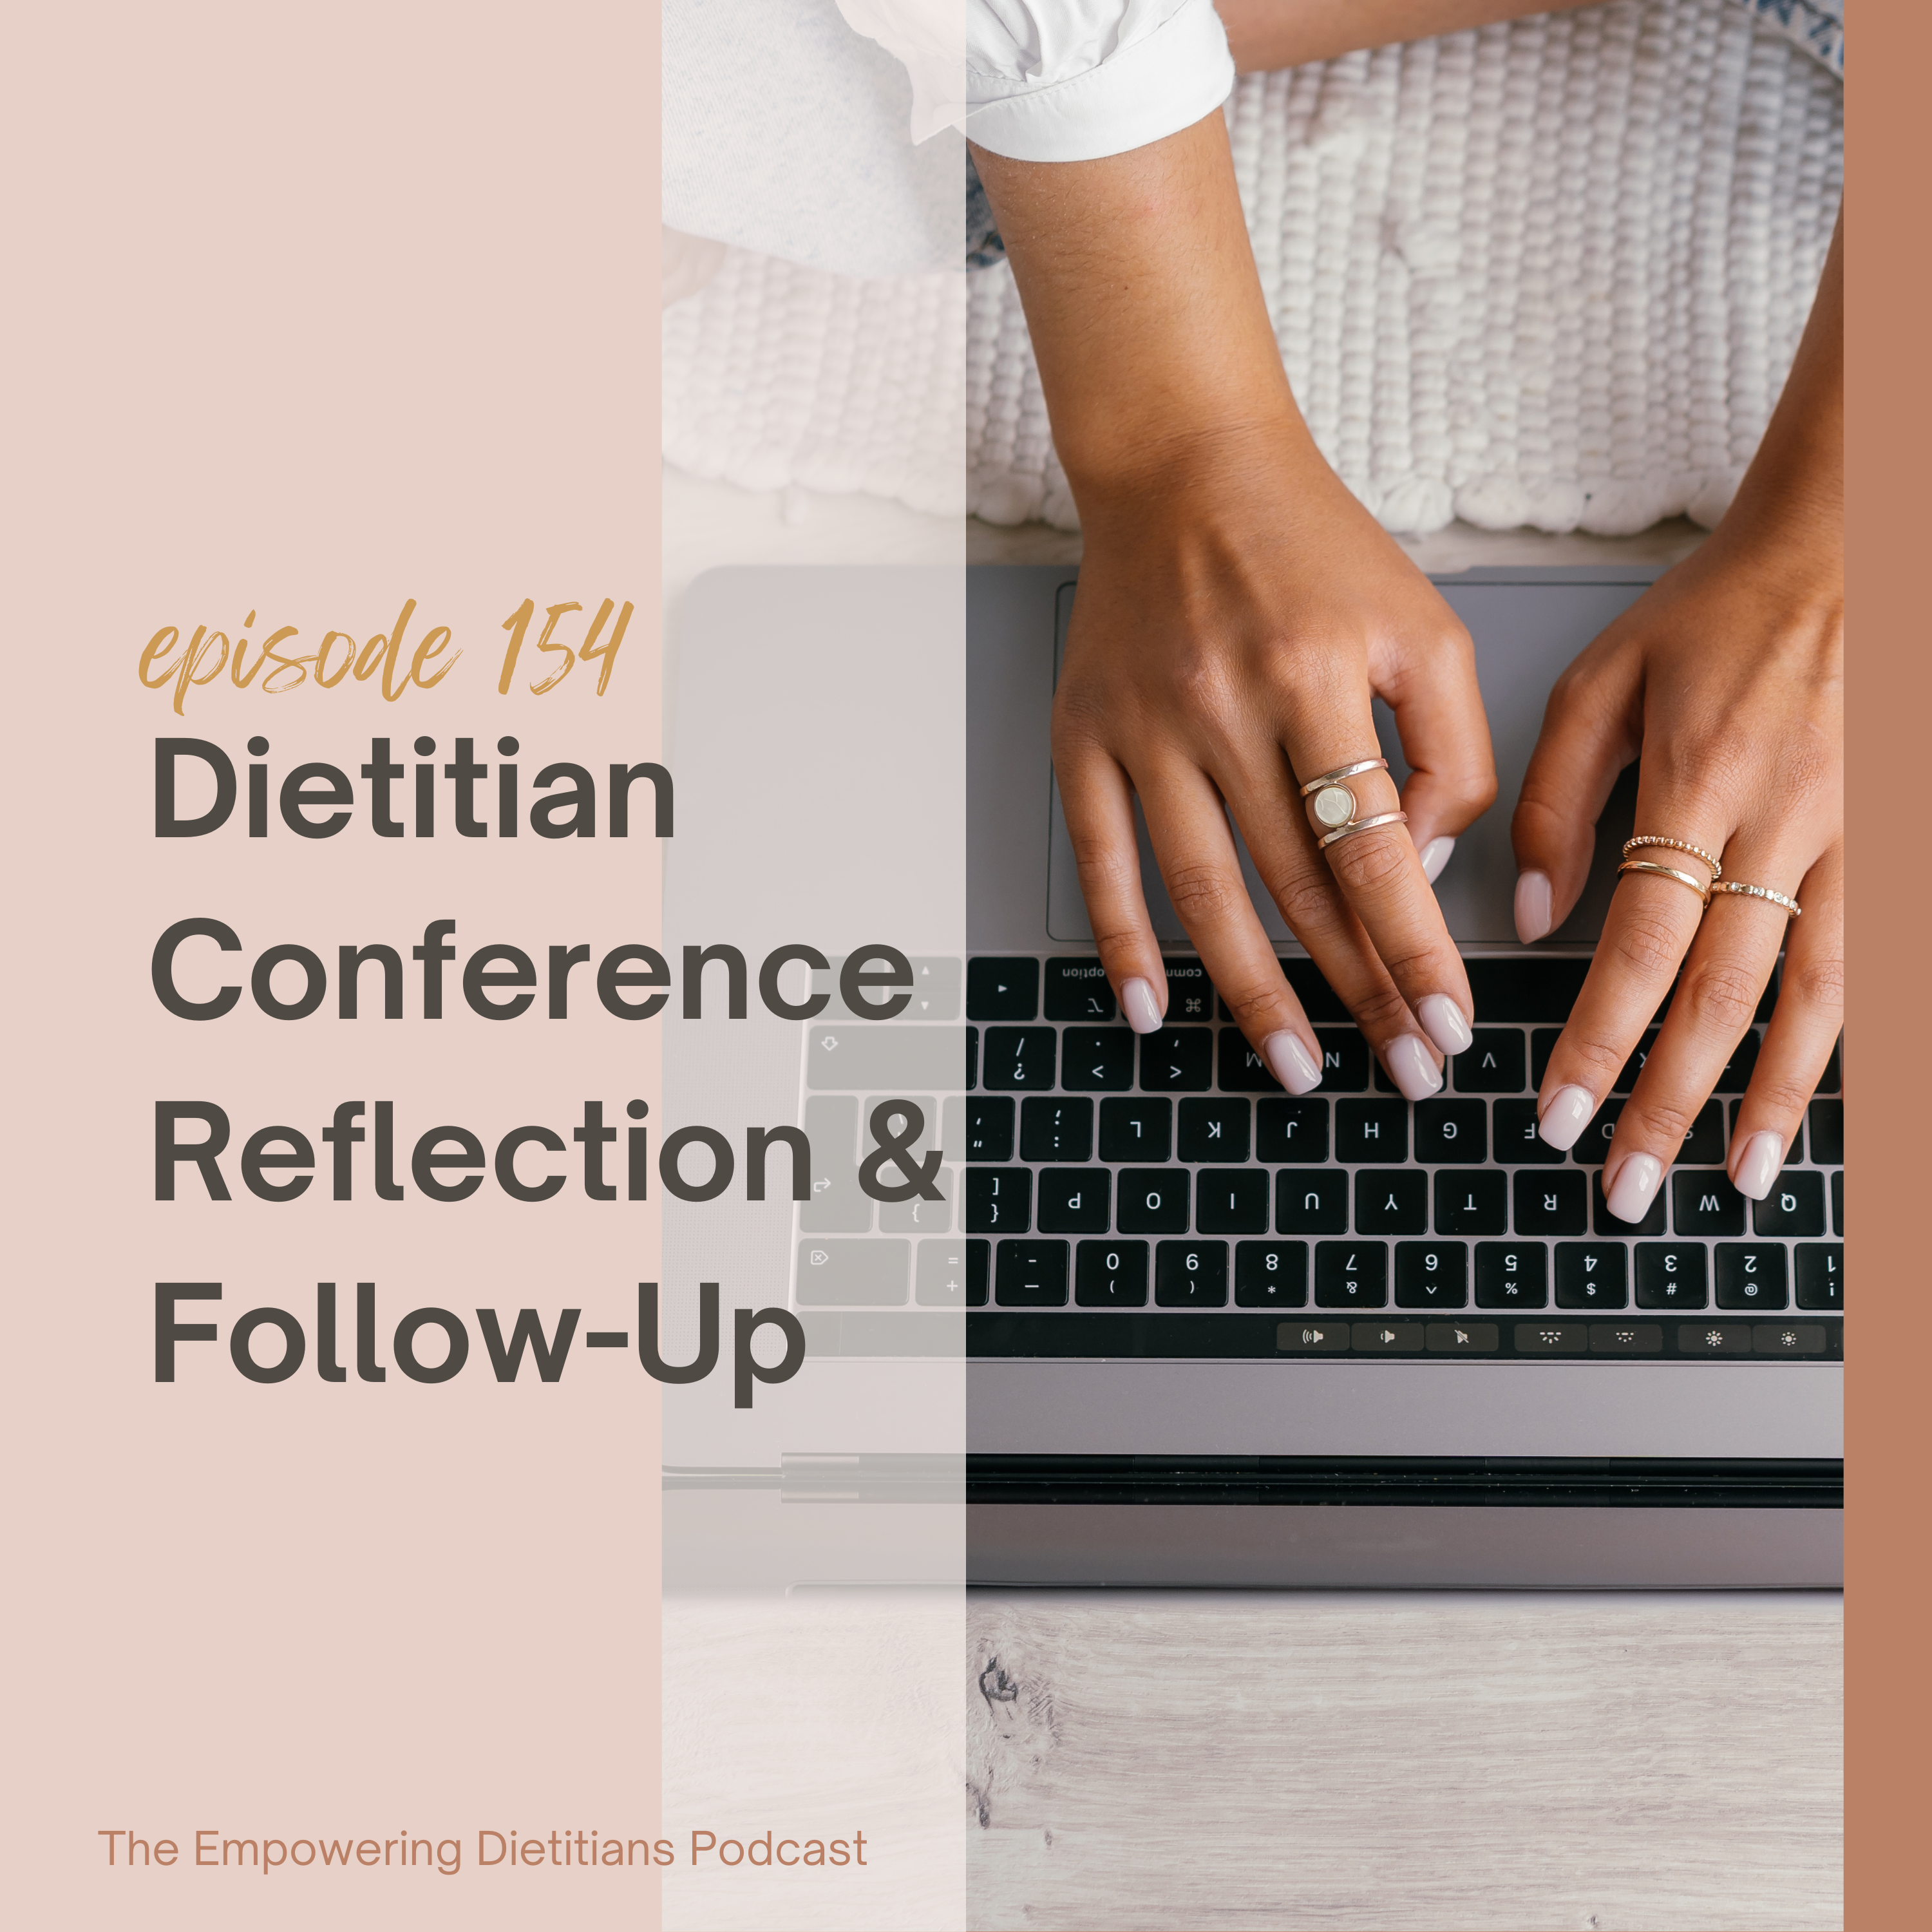 dietitian conference reflection & follow-up